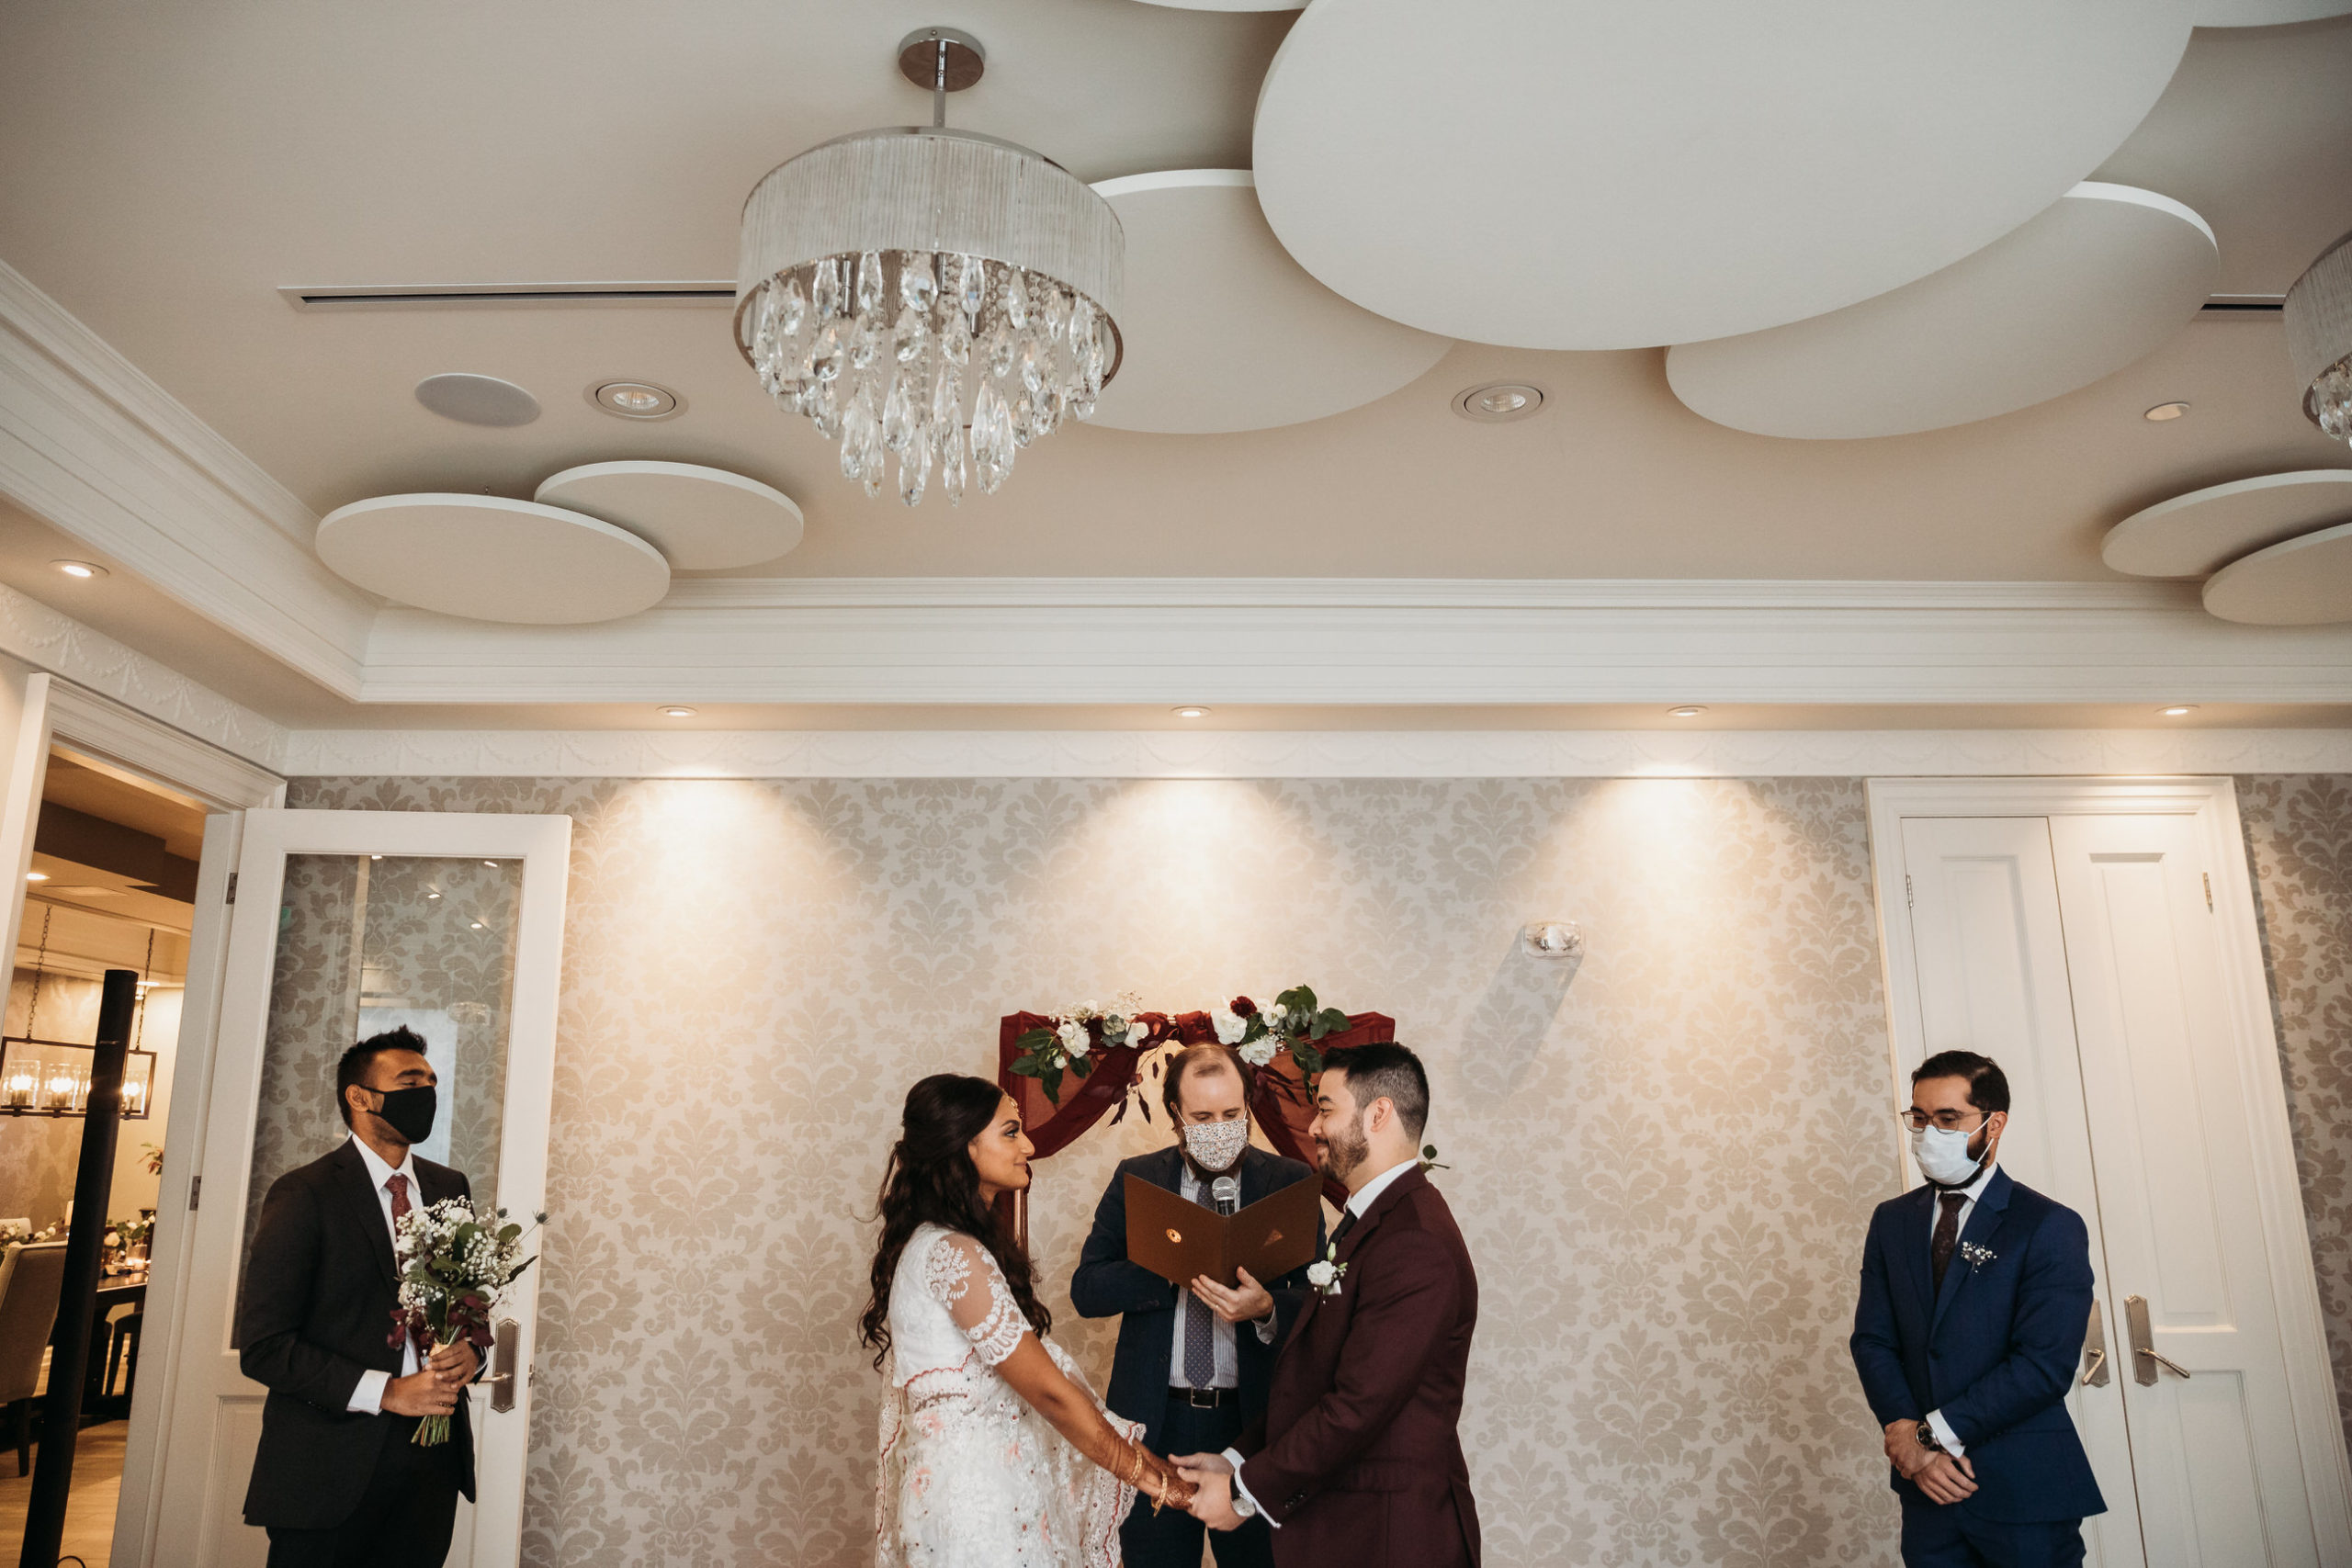 toronto micro wedding, toronto micro wedding venues, micro wedding photography packages